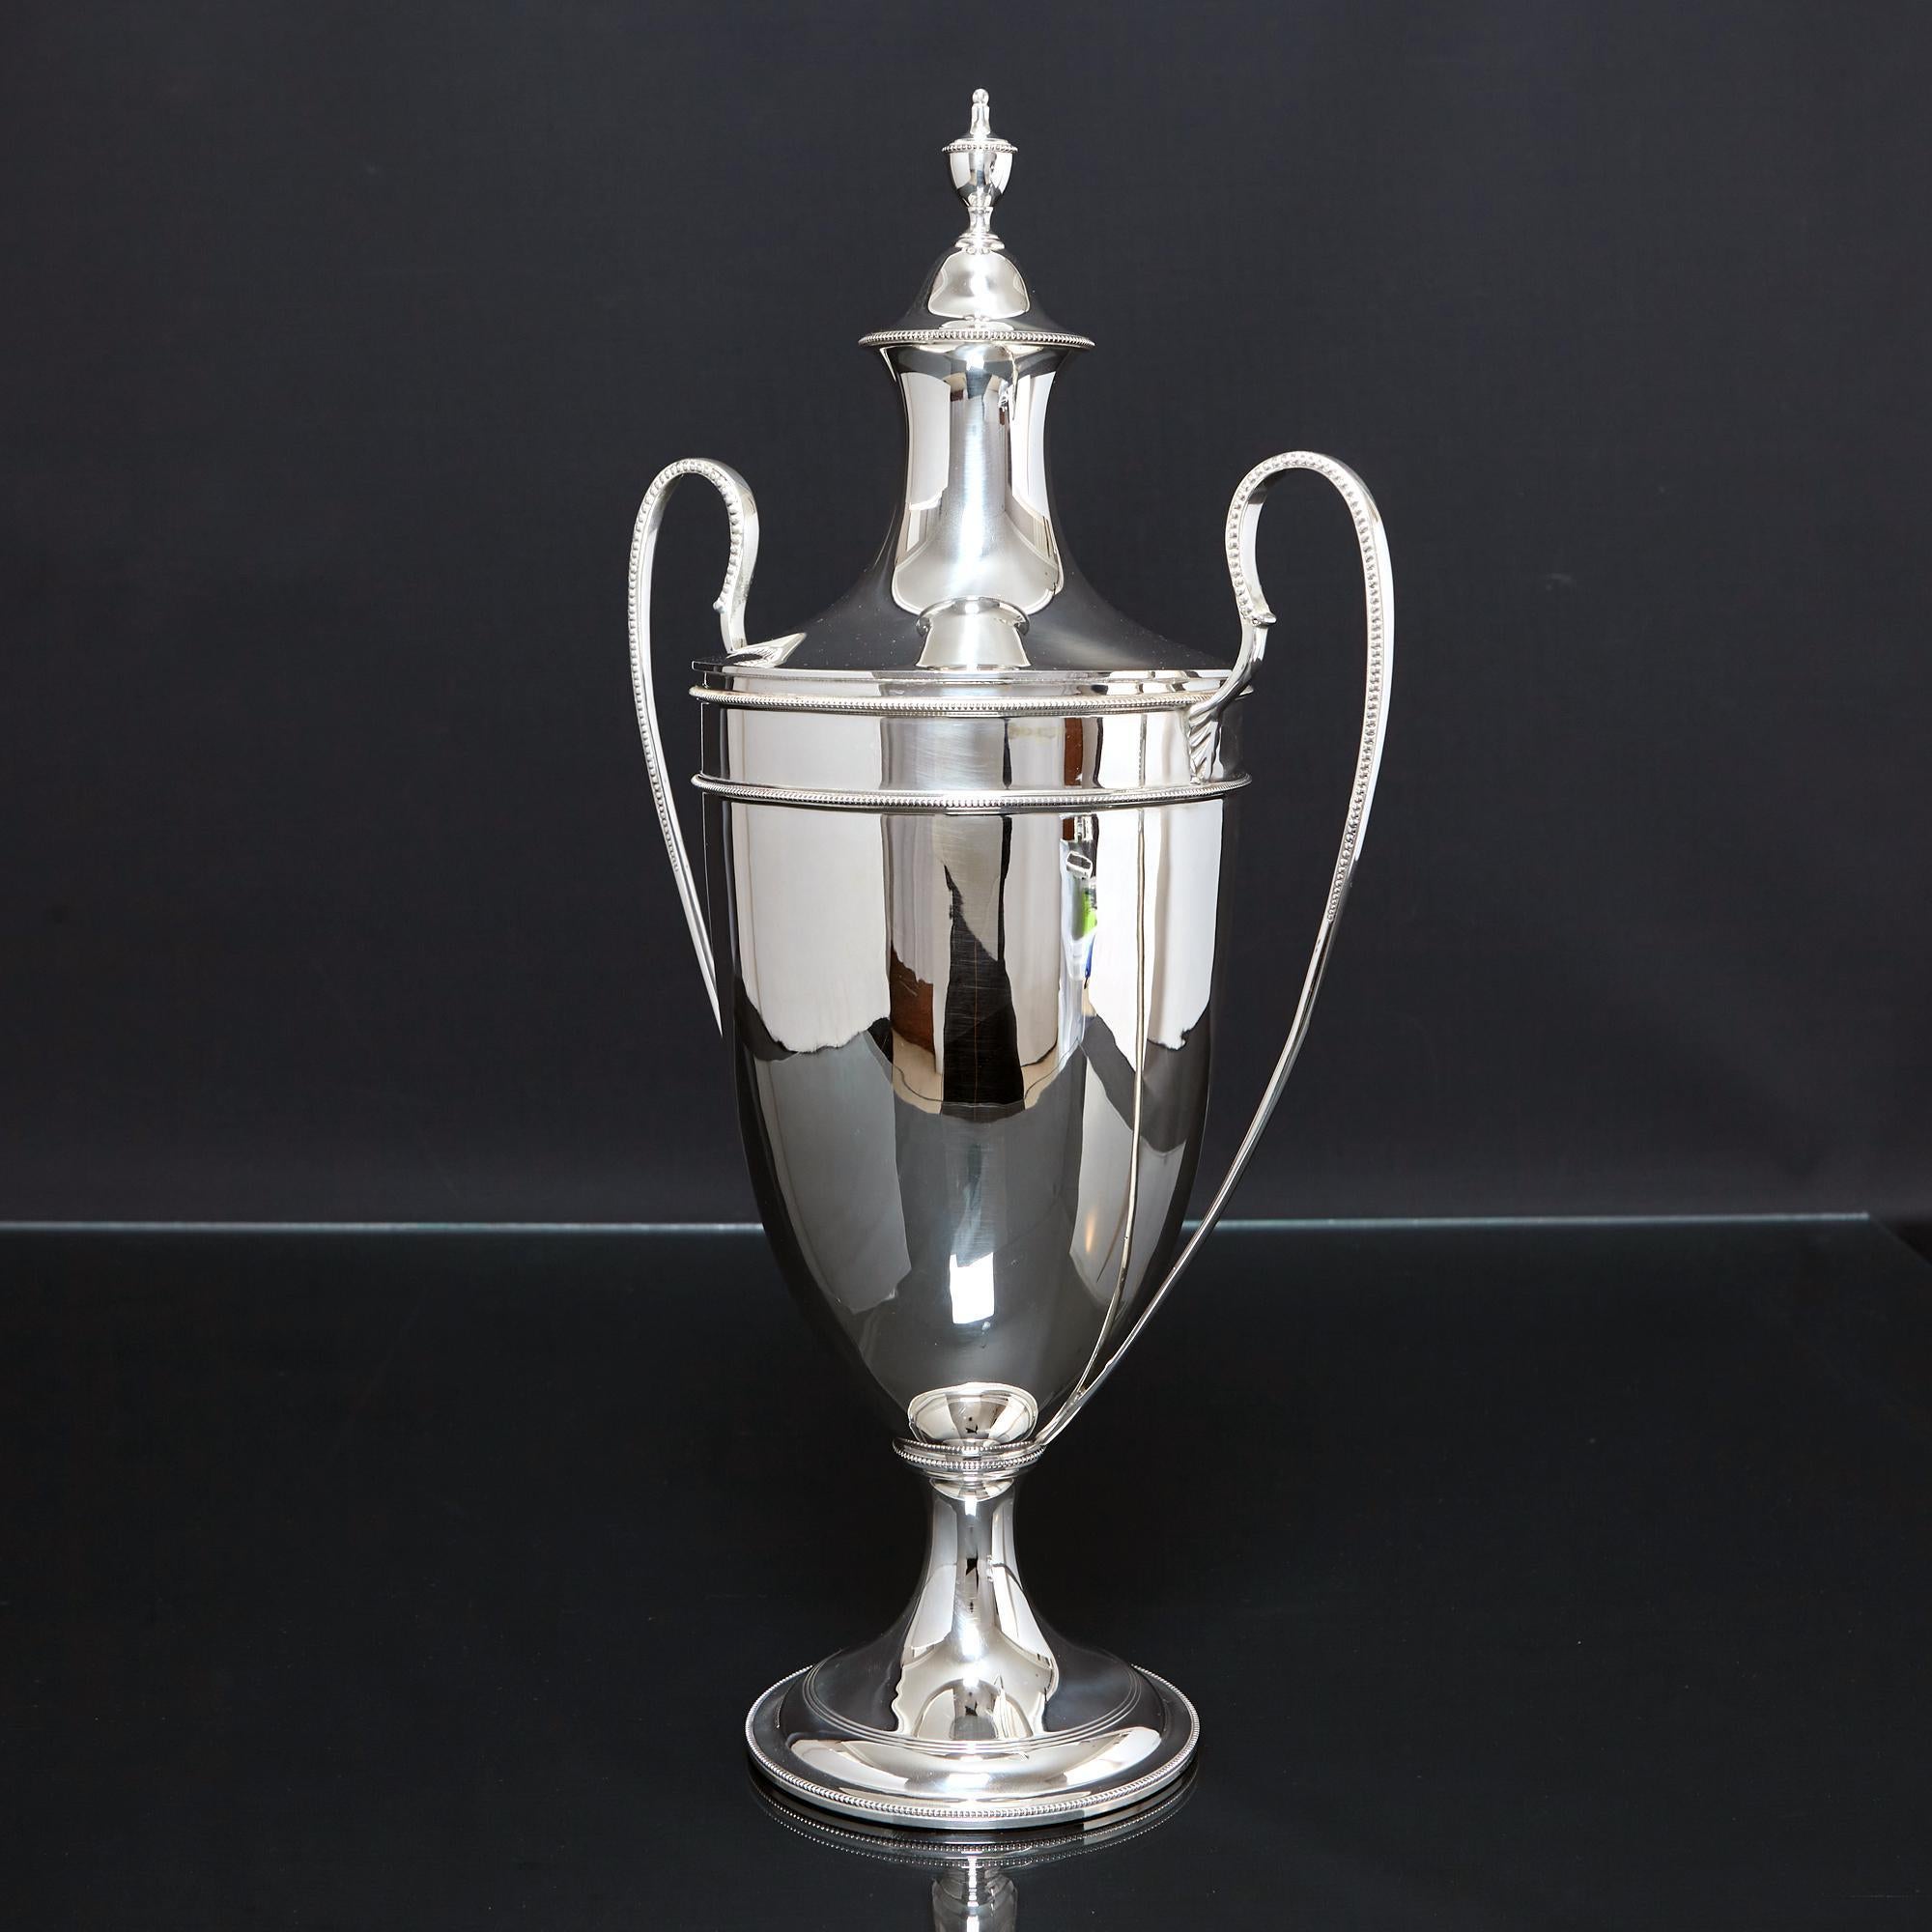 Elegant urn-shaped silver trophy cup and cover in the restrained and graceful neoclassical Adam style with long sweeping handles decorated with a fine bead decoration.  Two bands of bead decoration surround the body and the spreading silver base is